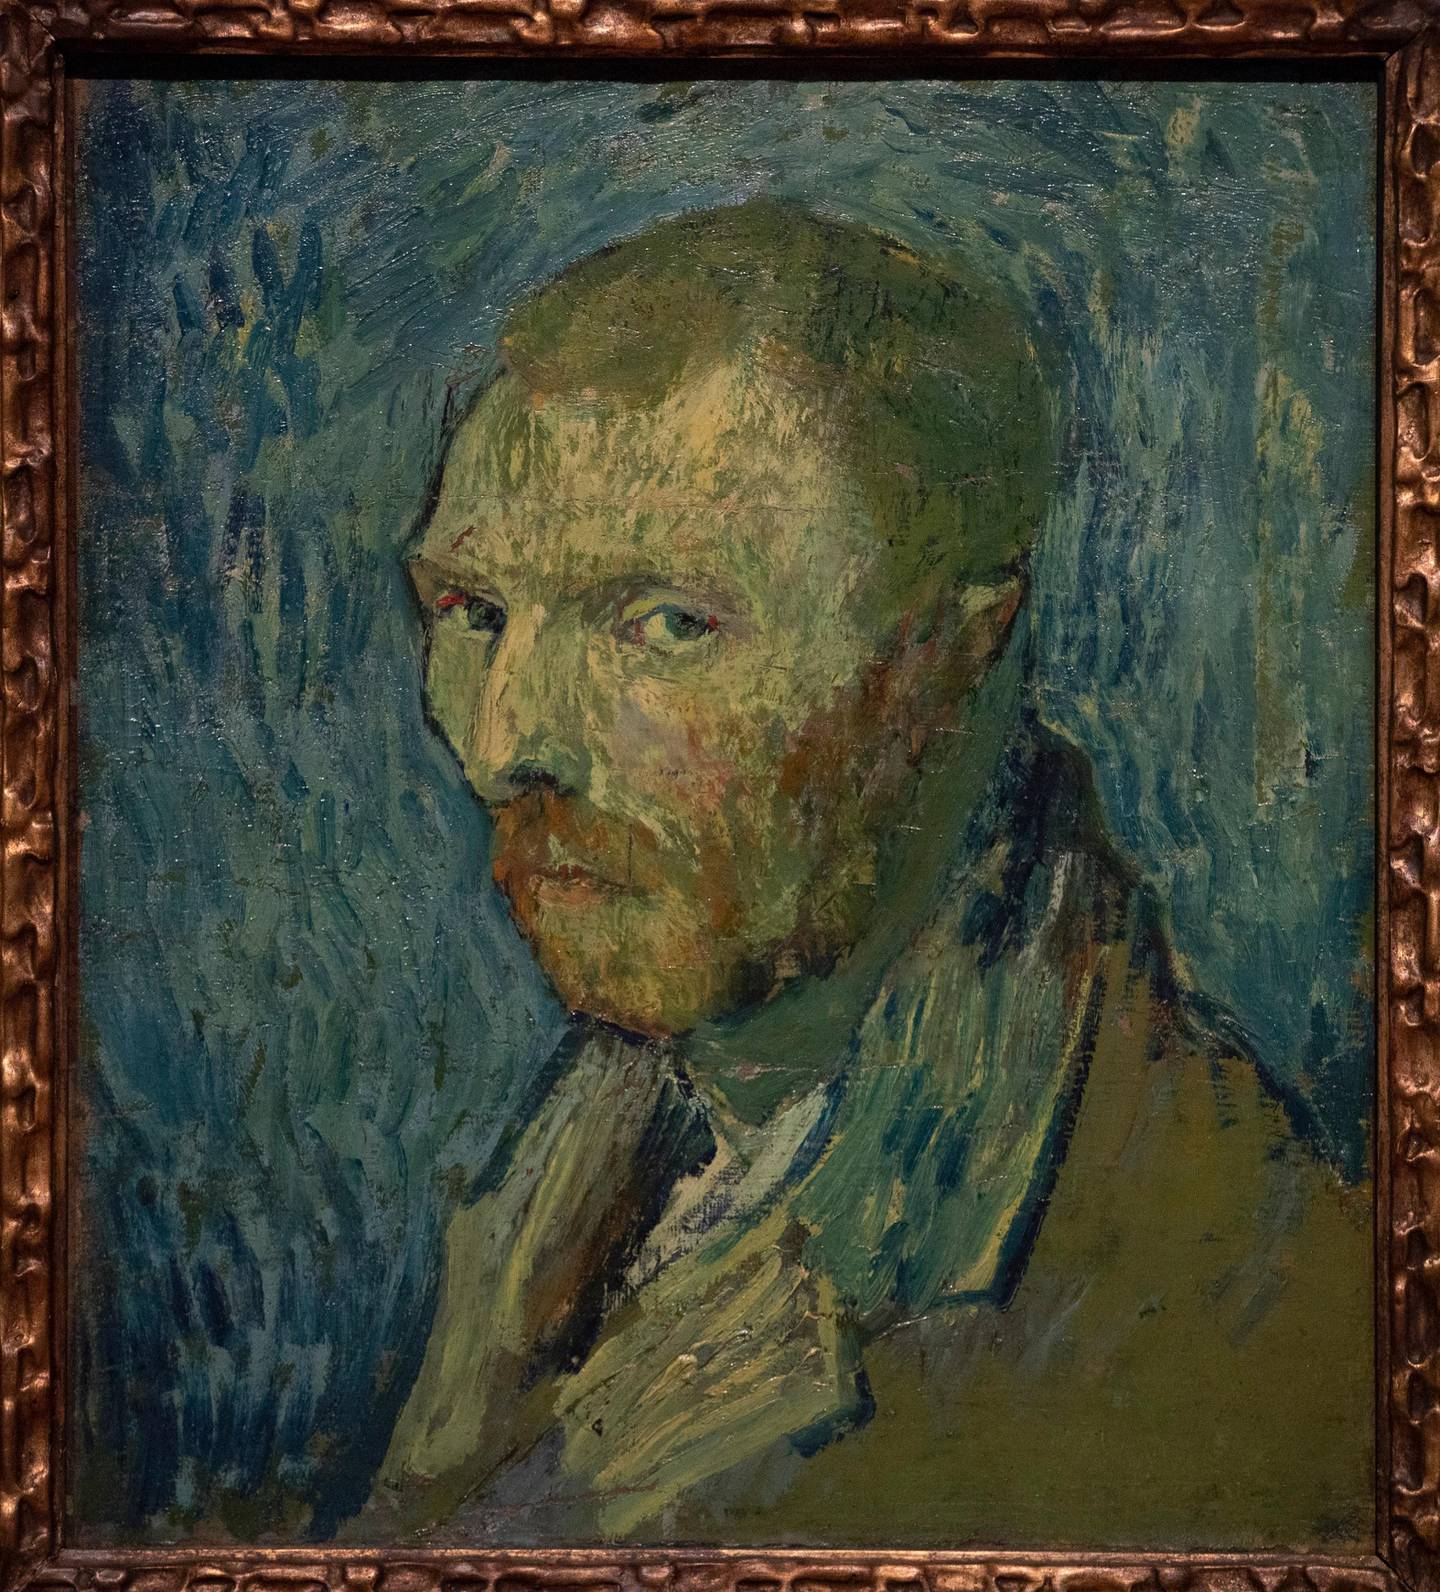 The previously contested painting by Dutch master Vincent van Gogh, a 1889 self-portrait, of which the authenticity was confirmed during a press conference in Amsterdam, Netherlands, Monday, Jan. 20, 2020. The painting, which belongs to the National Museum in Norway, was painted at the Saint-Paul de Mausole psychiatric institution in Saint-Remy de Provence, France. (AP Photo/Peter Dejong)